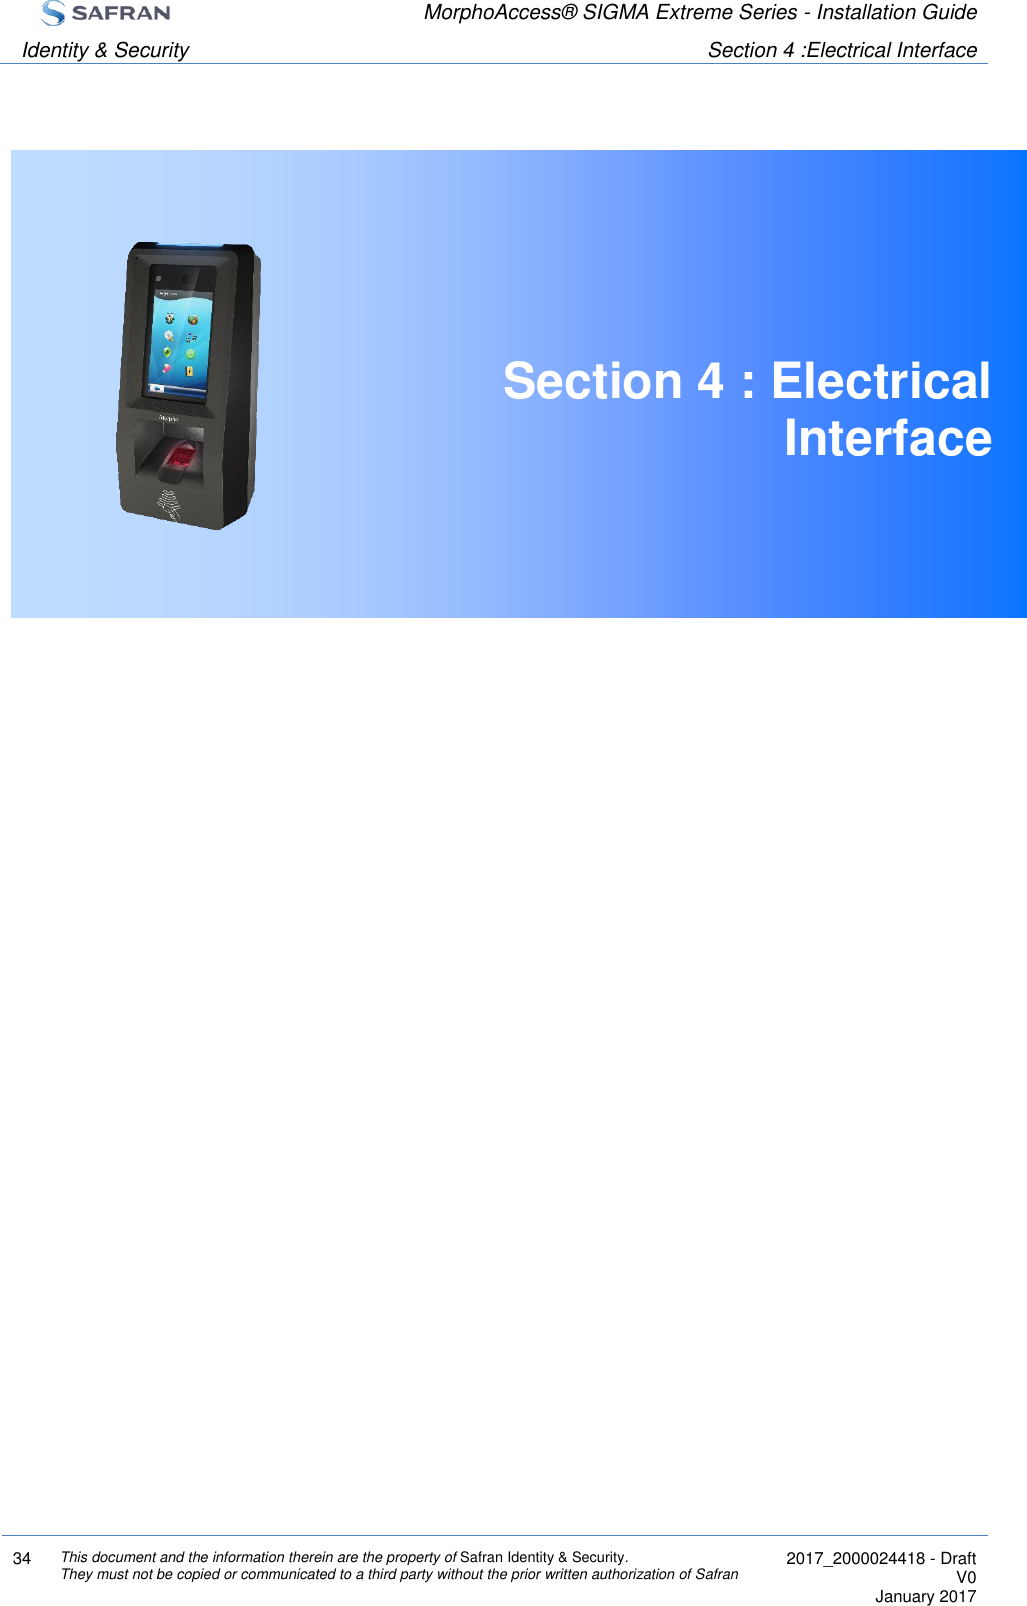  MorphoAccess® SIGMA Extreme Series - Installation Guide  Identity &amp; Security Section 4 :Electrical Interface  34 This document and the information therein are the property of Safran Identity &amp; Security. They must not be copied or communicated to a third party without the prior written authorization of Safran  2017_2000024418 - Draft V0 January 2017   Section 4 : Electrical Interface     